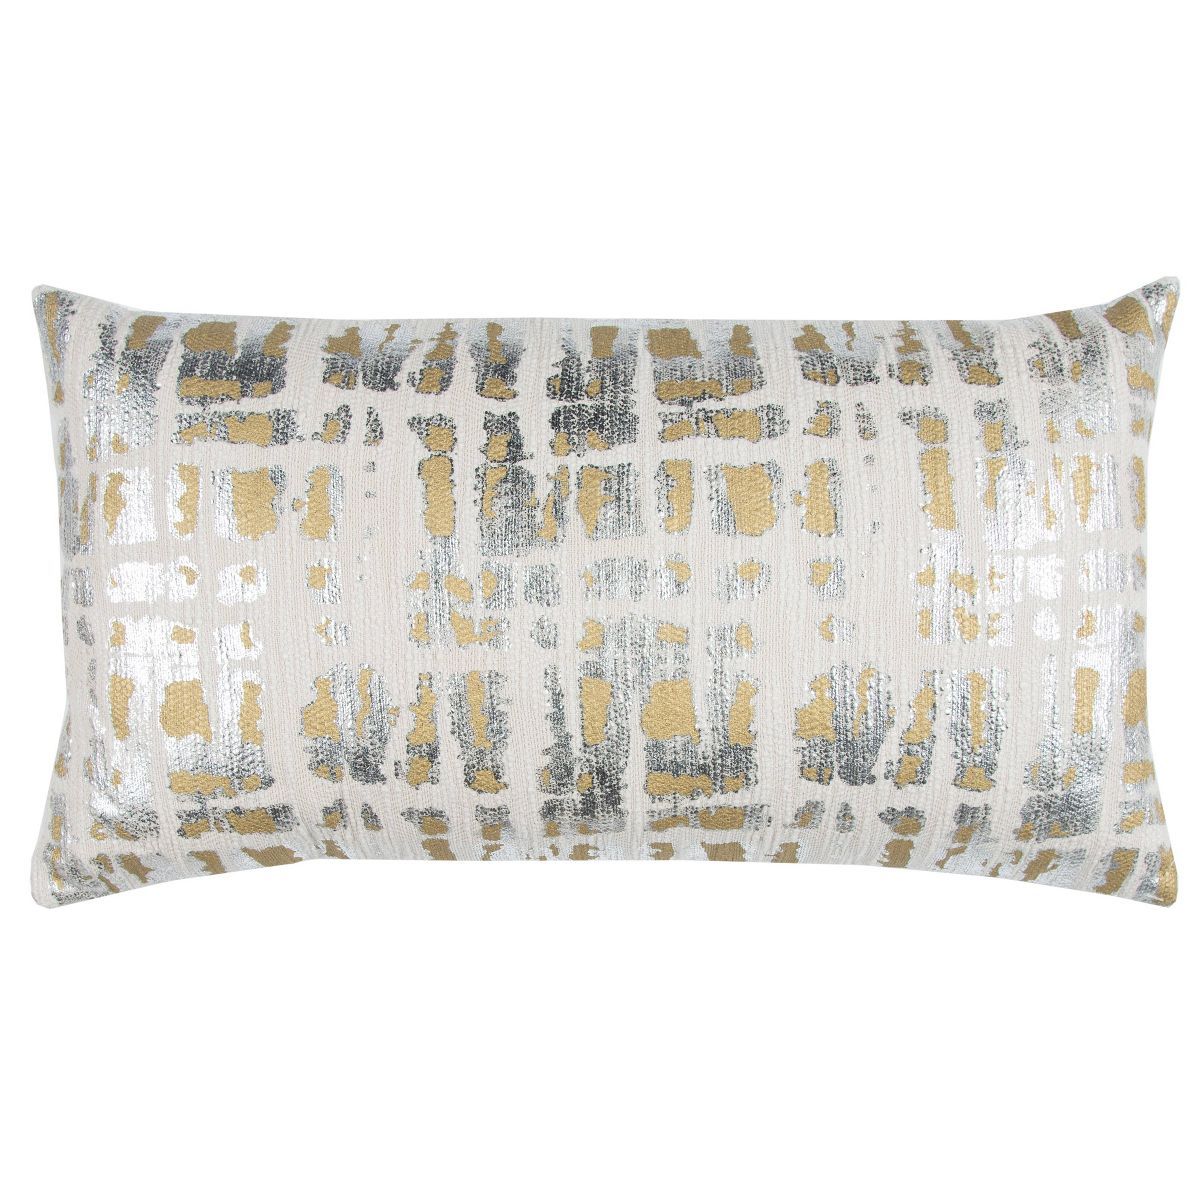 14"X26" Oversized Geometric Poly Filled Lumbar Throw Pillow Silver/Gold - Rizzy Home | Target